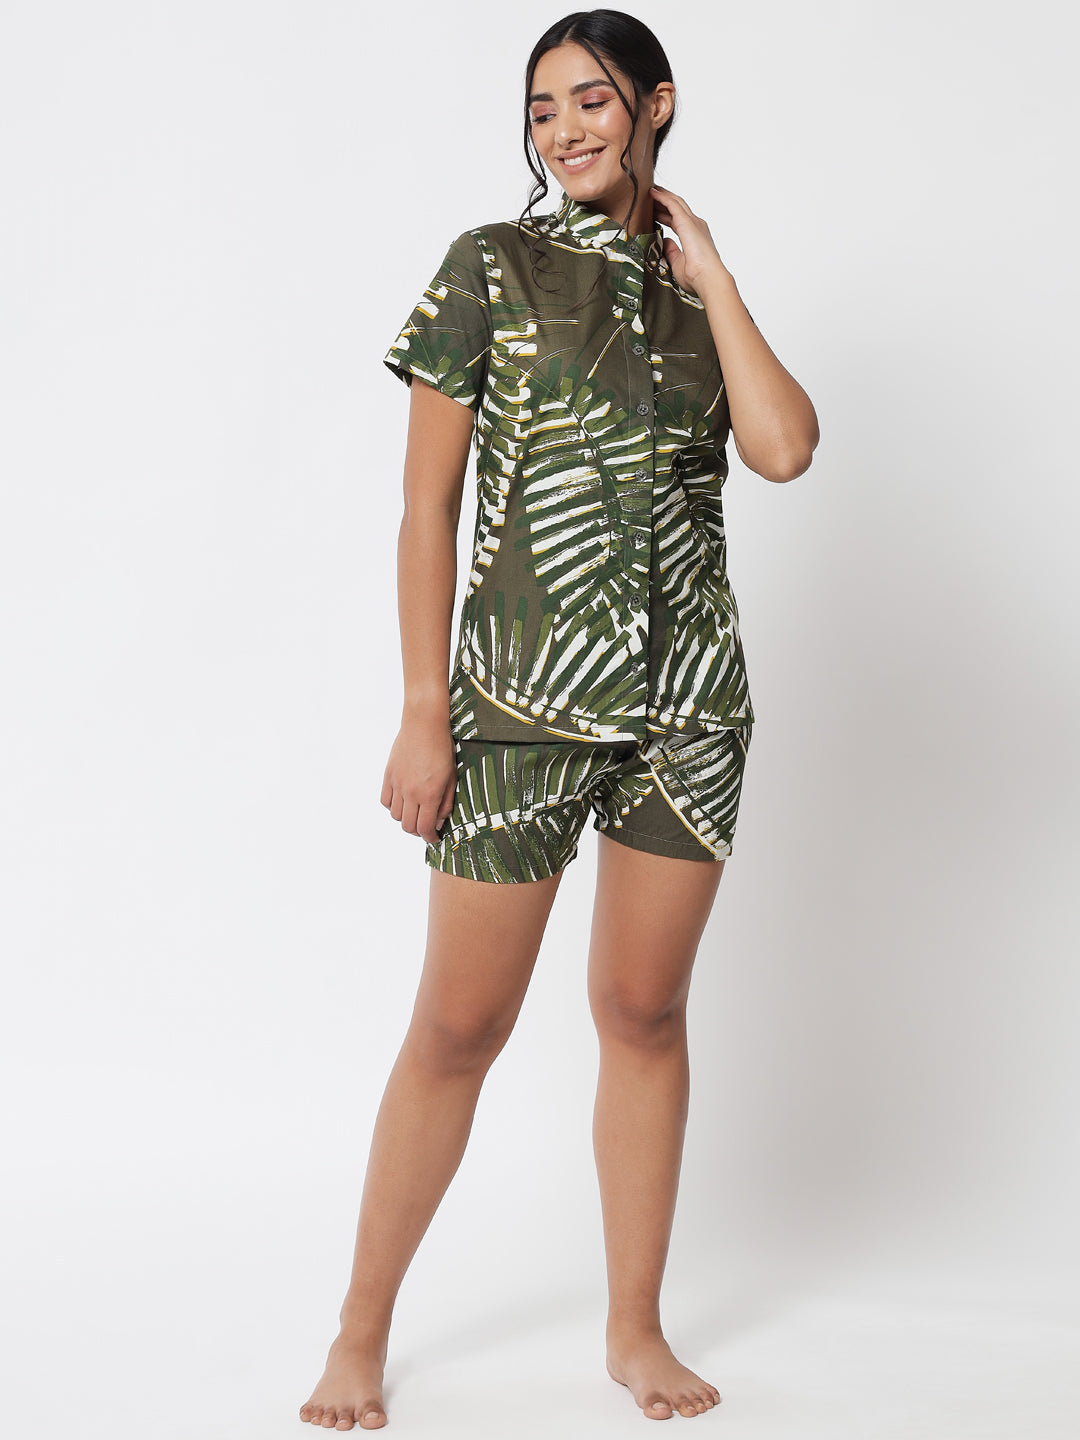 forest printed top & shorts set plus size